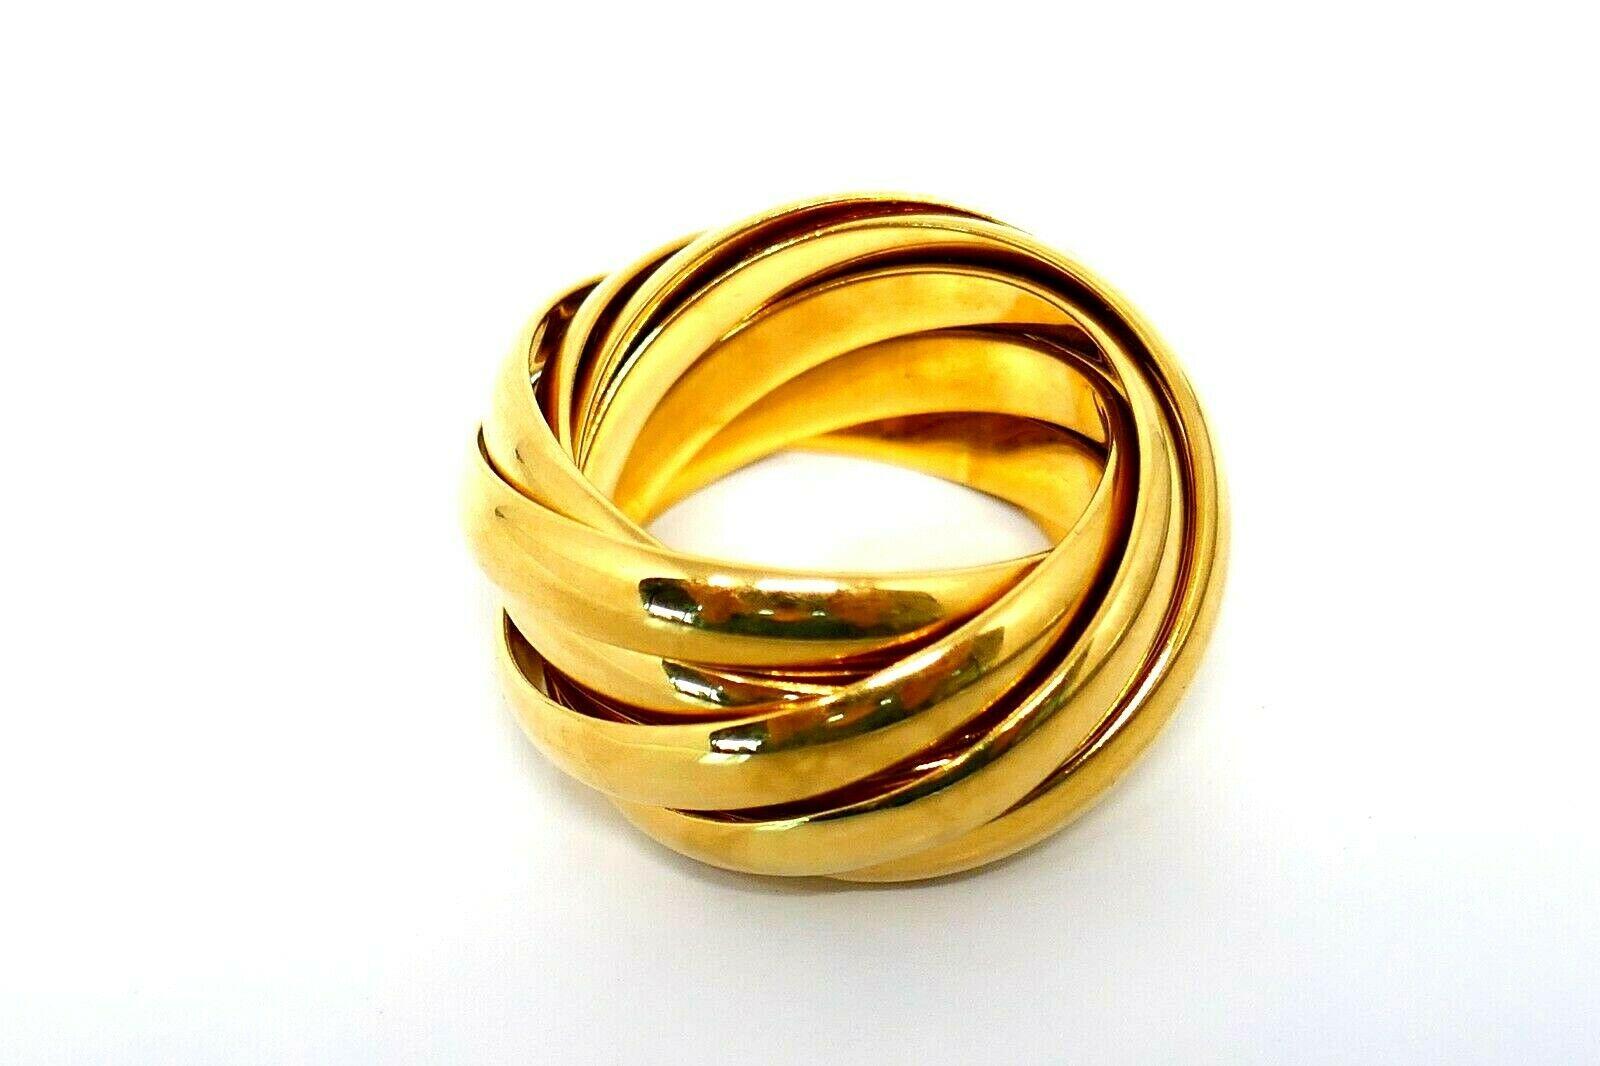 Nine interlocking bands that form a dome-like rolling ring.  Nine-band design copyrighted by Paloma Picasso. 
Made of 18k yellow gold with a fine polished finish. Tiffany's classic meets innovative creativity of Paloma Picasso. Wearable yet